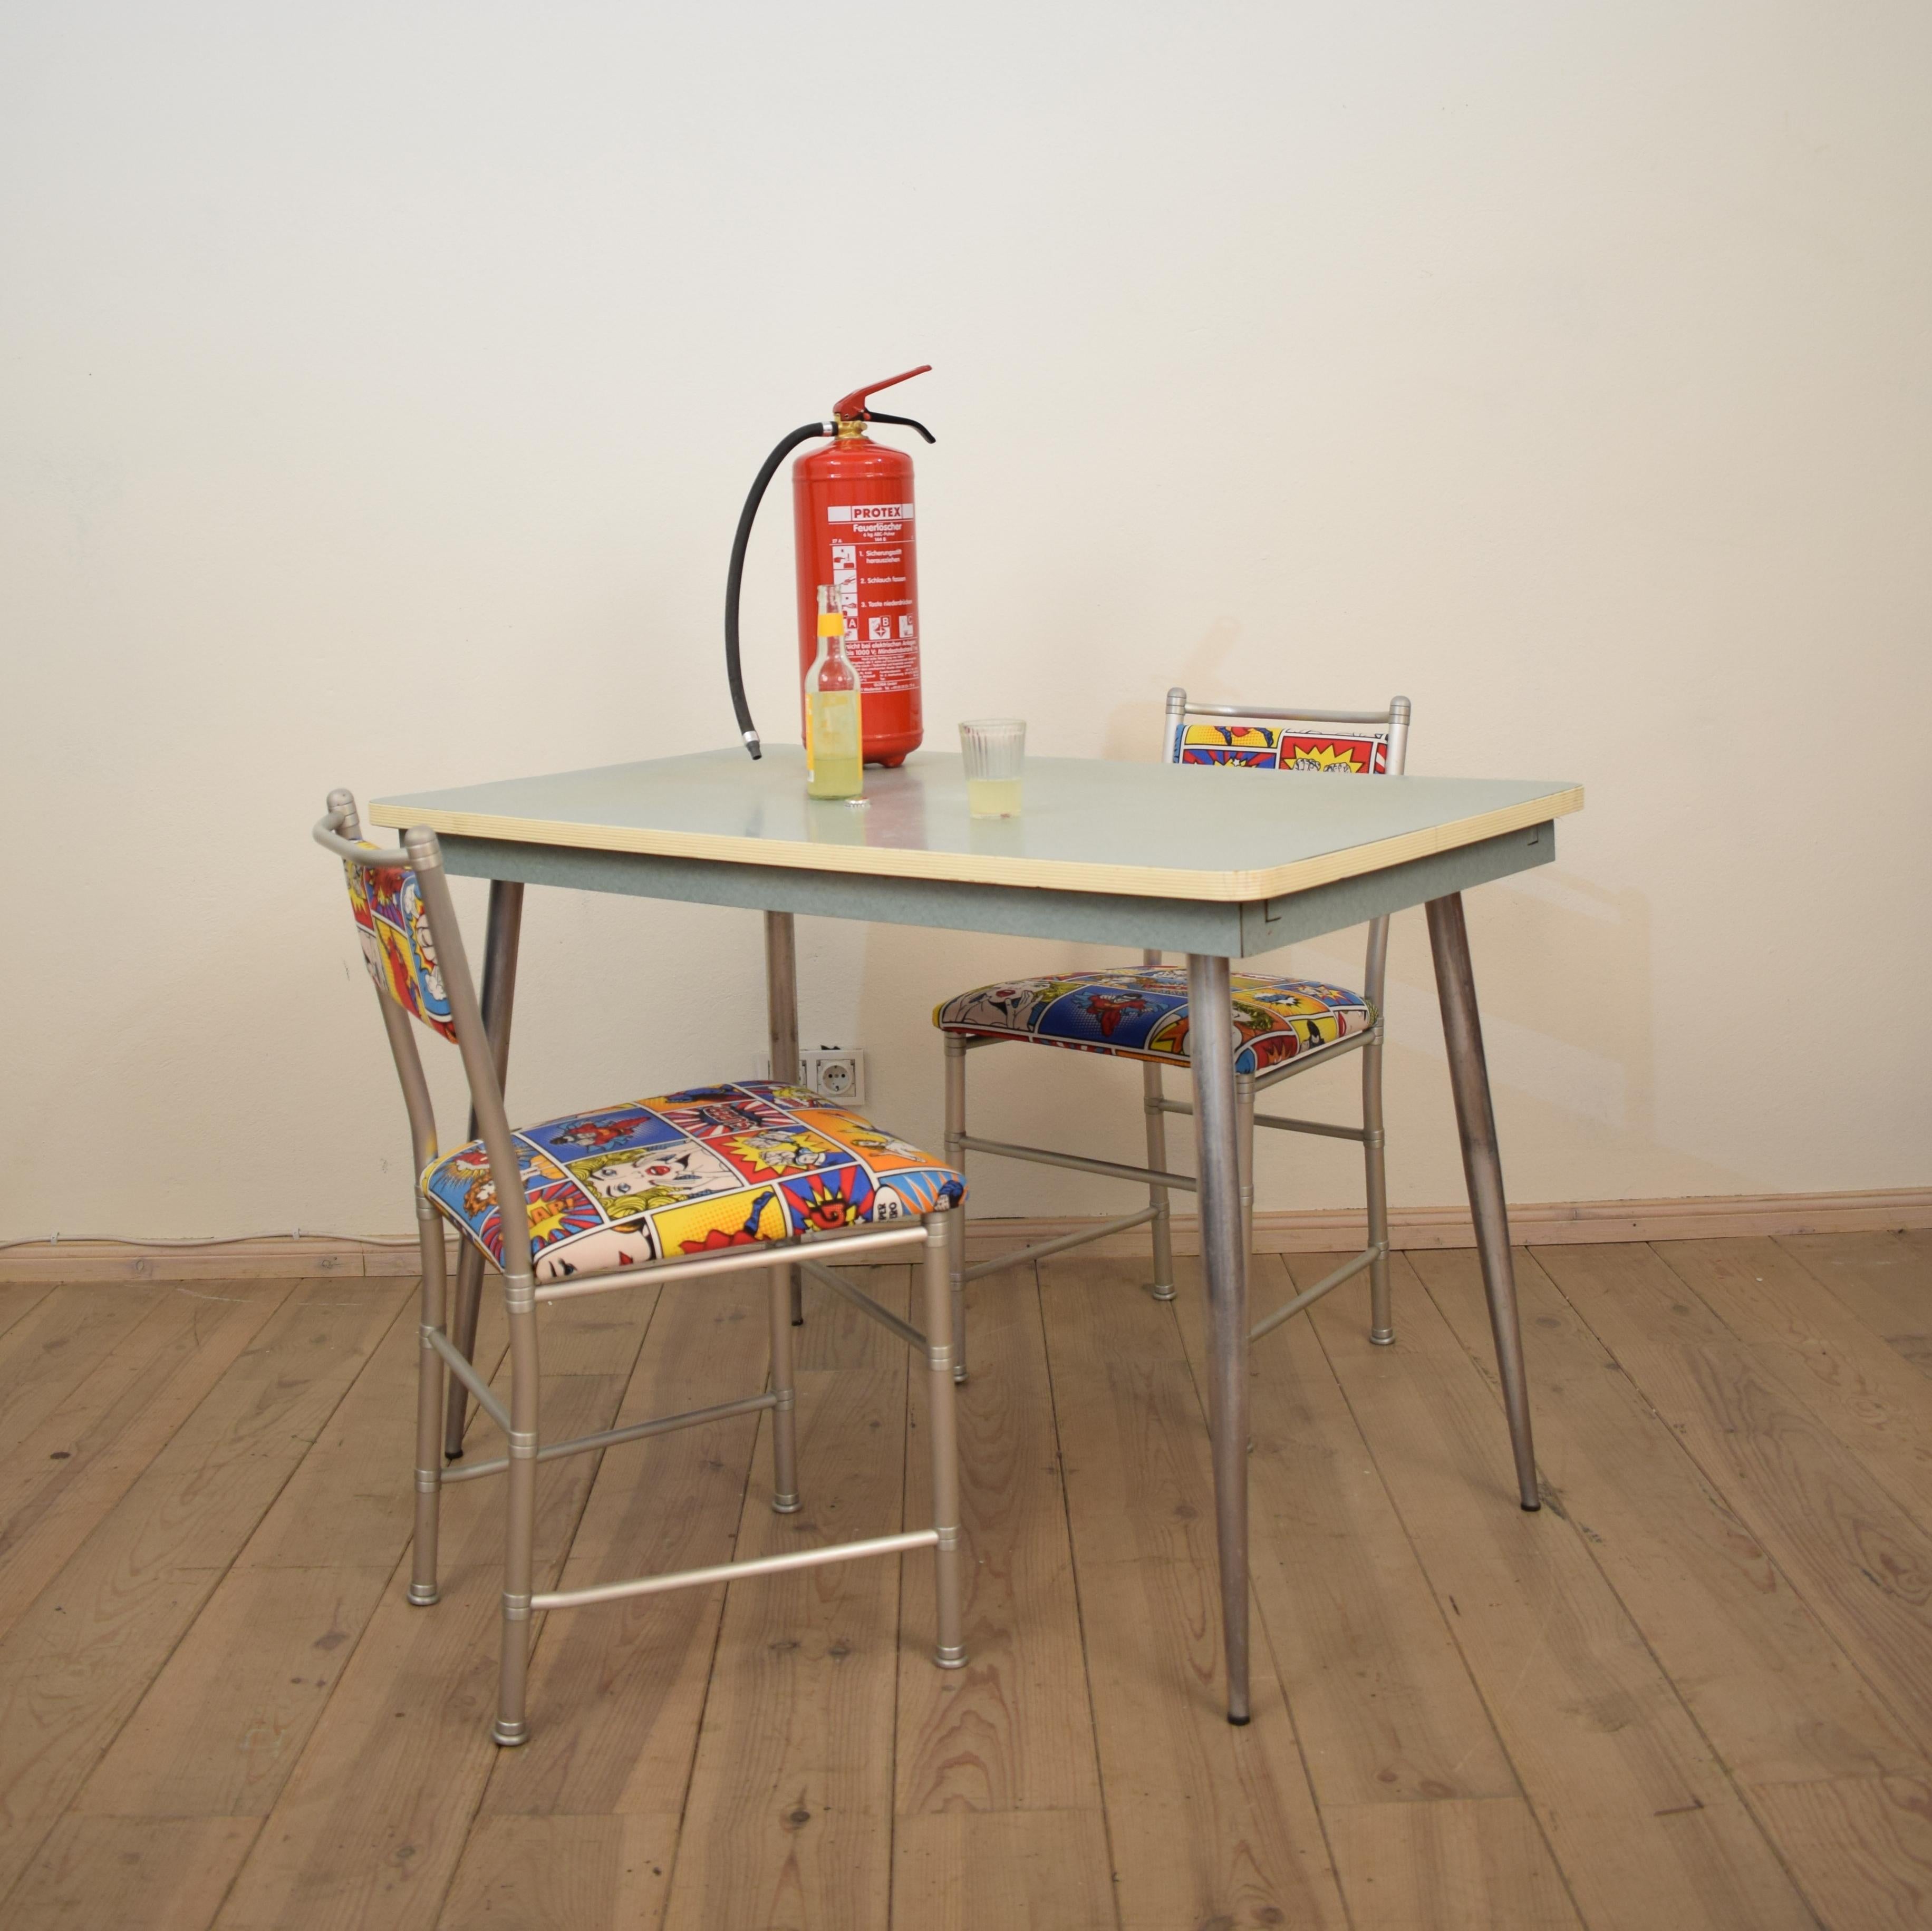 1950s formica kitchen table and chairs for sale